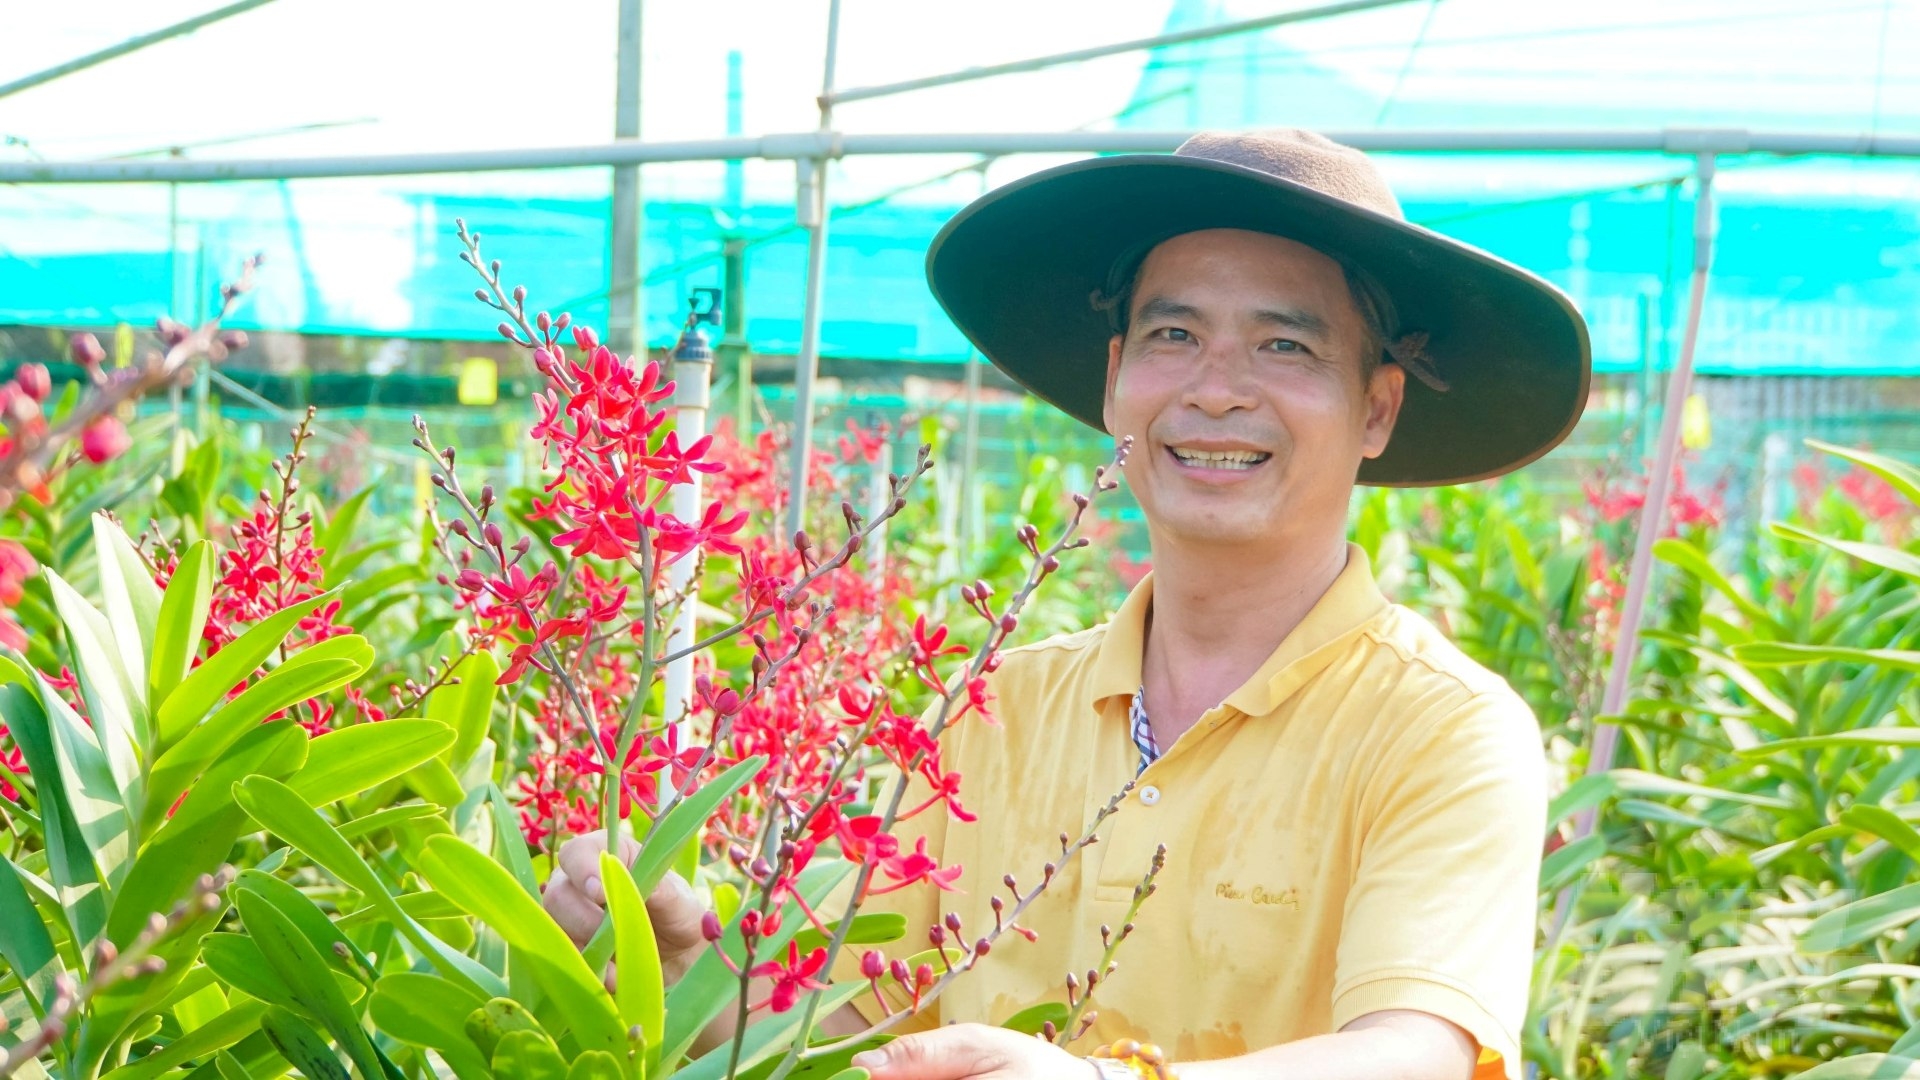 In order to have the crimson orchids blooming every day, Hoang Hoa had to overcome prejudices and put all his faith in the water of the East - Tay Ninh Canal. Photo: Le Binh.